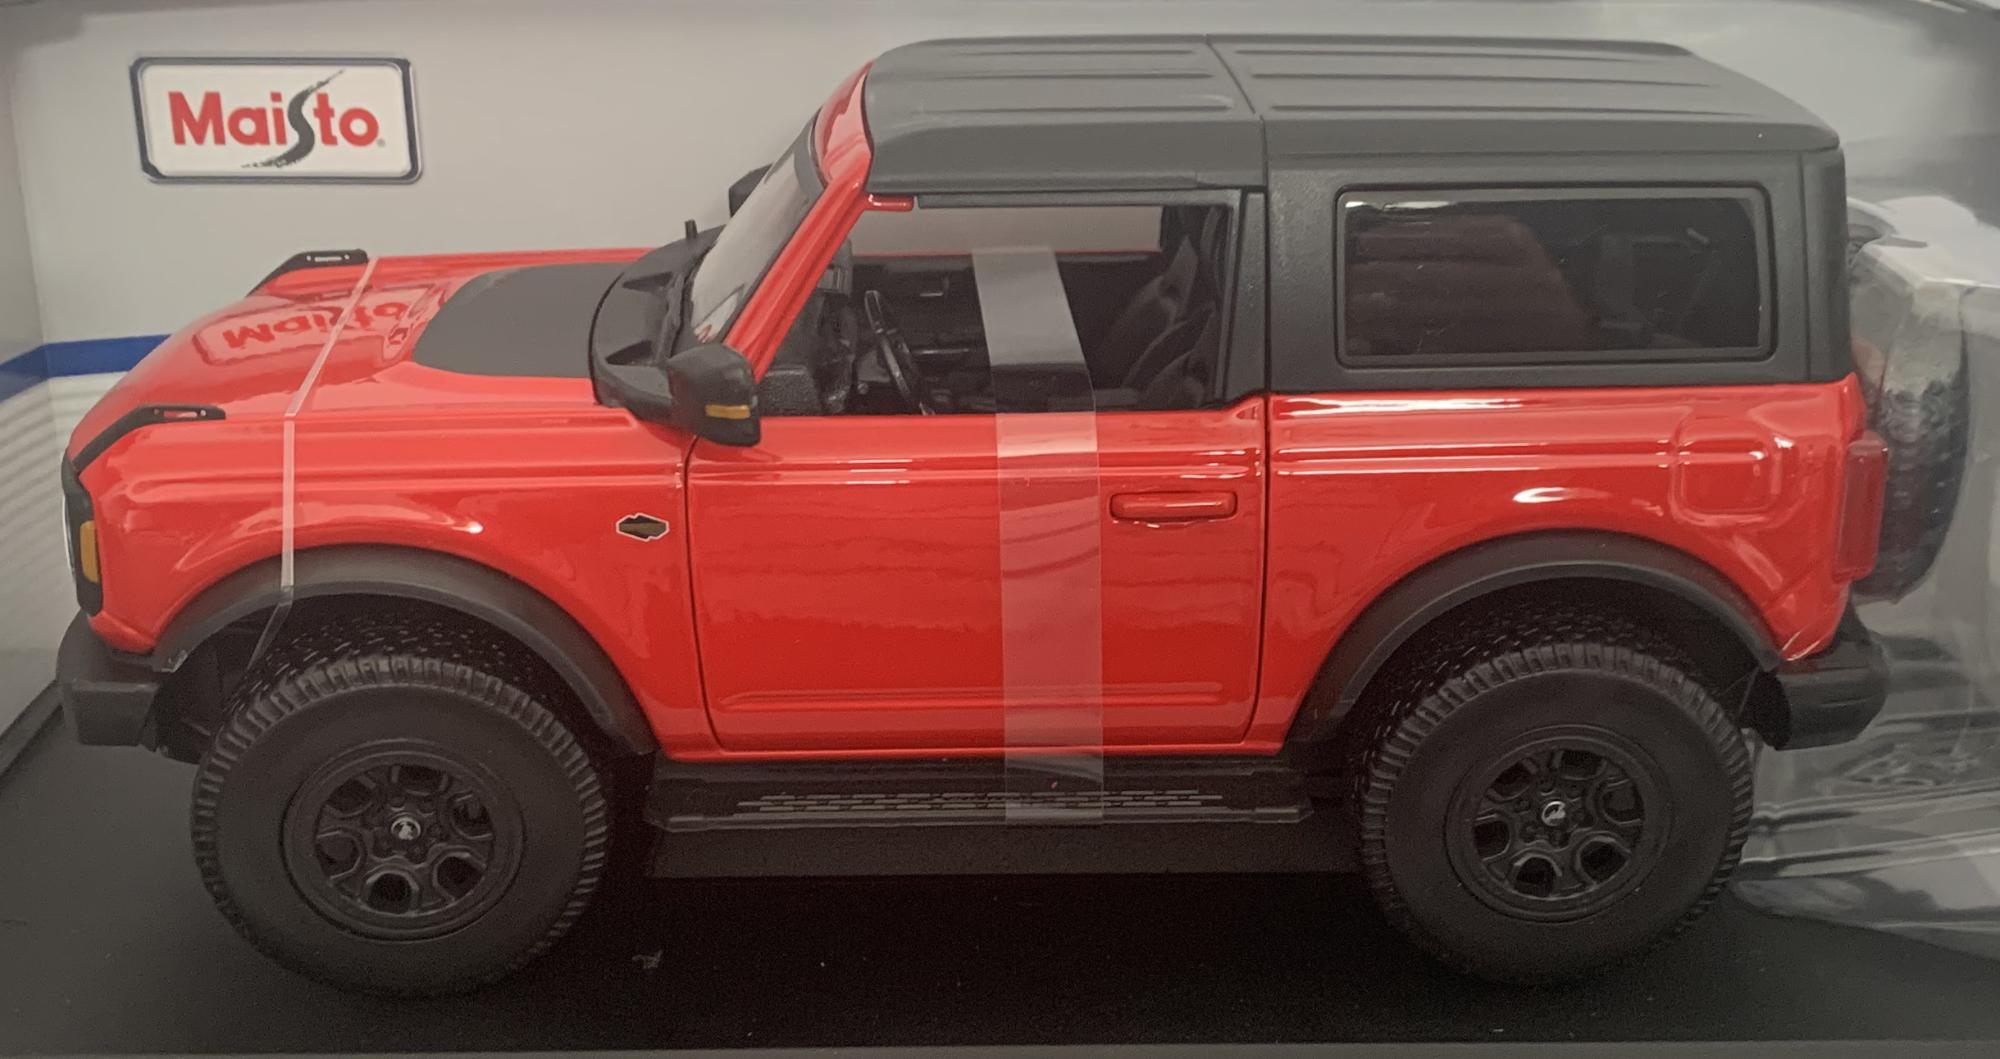 Ford Bronco Wildtrak 2021 in red with black rood, 1:18 scale diecast model from Maisto